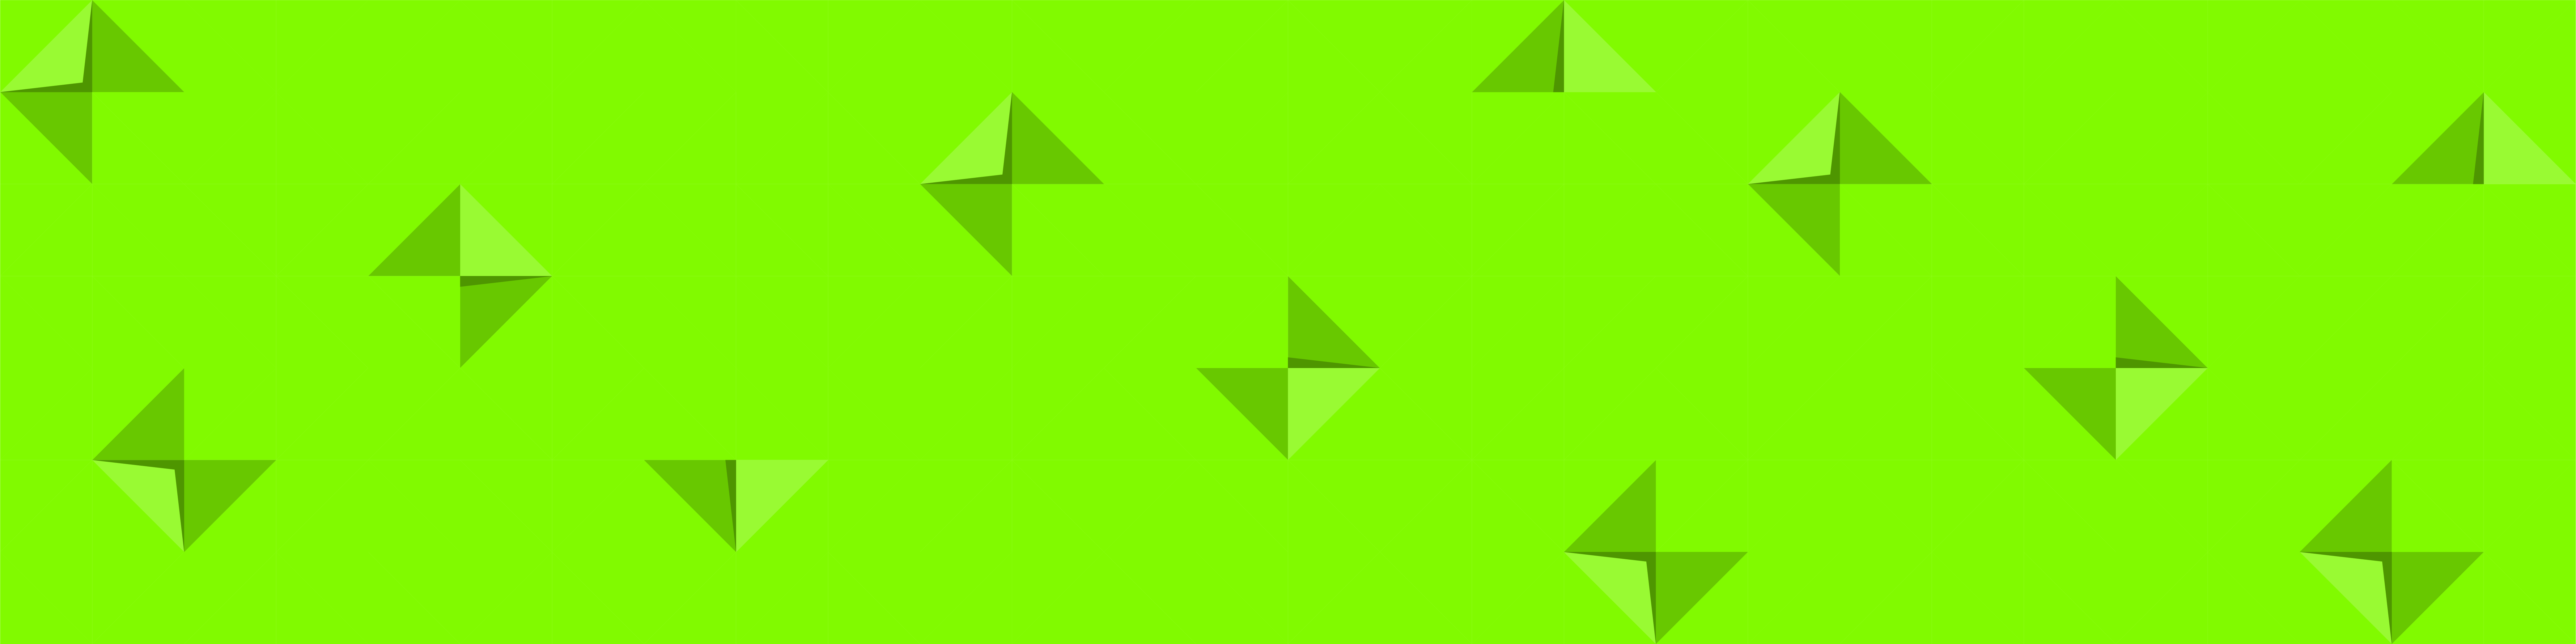 Featured Image Origami Green Little